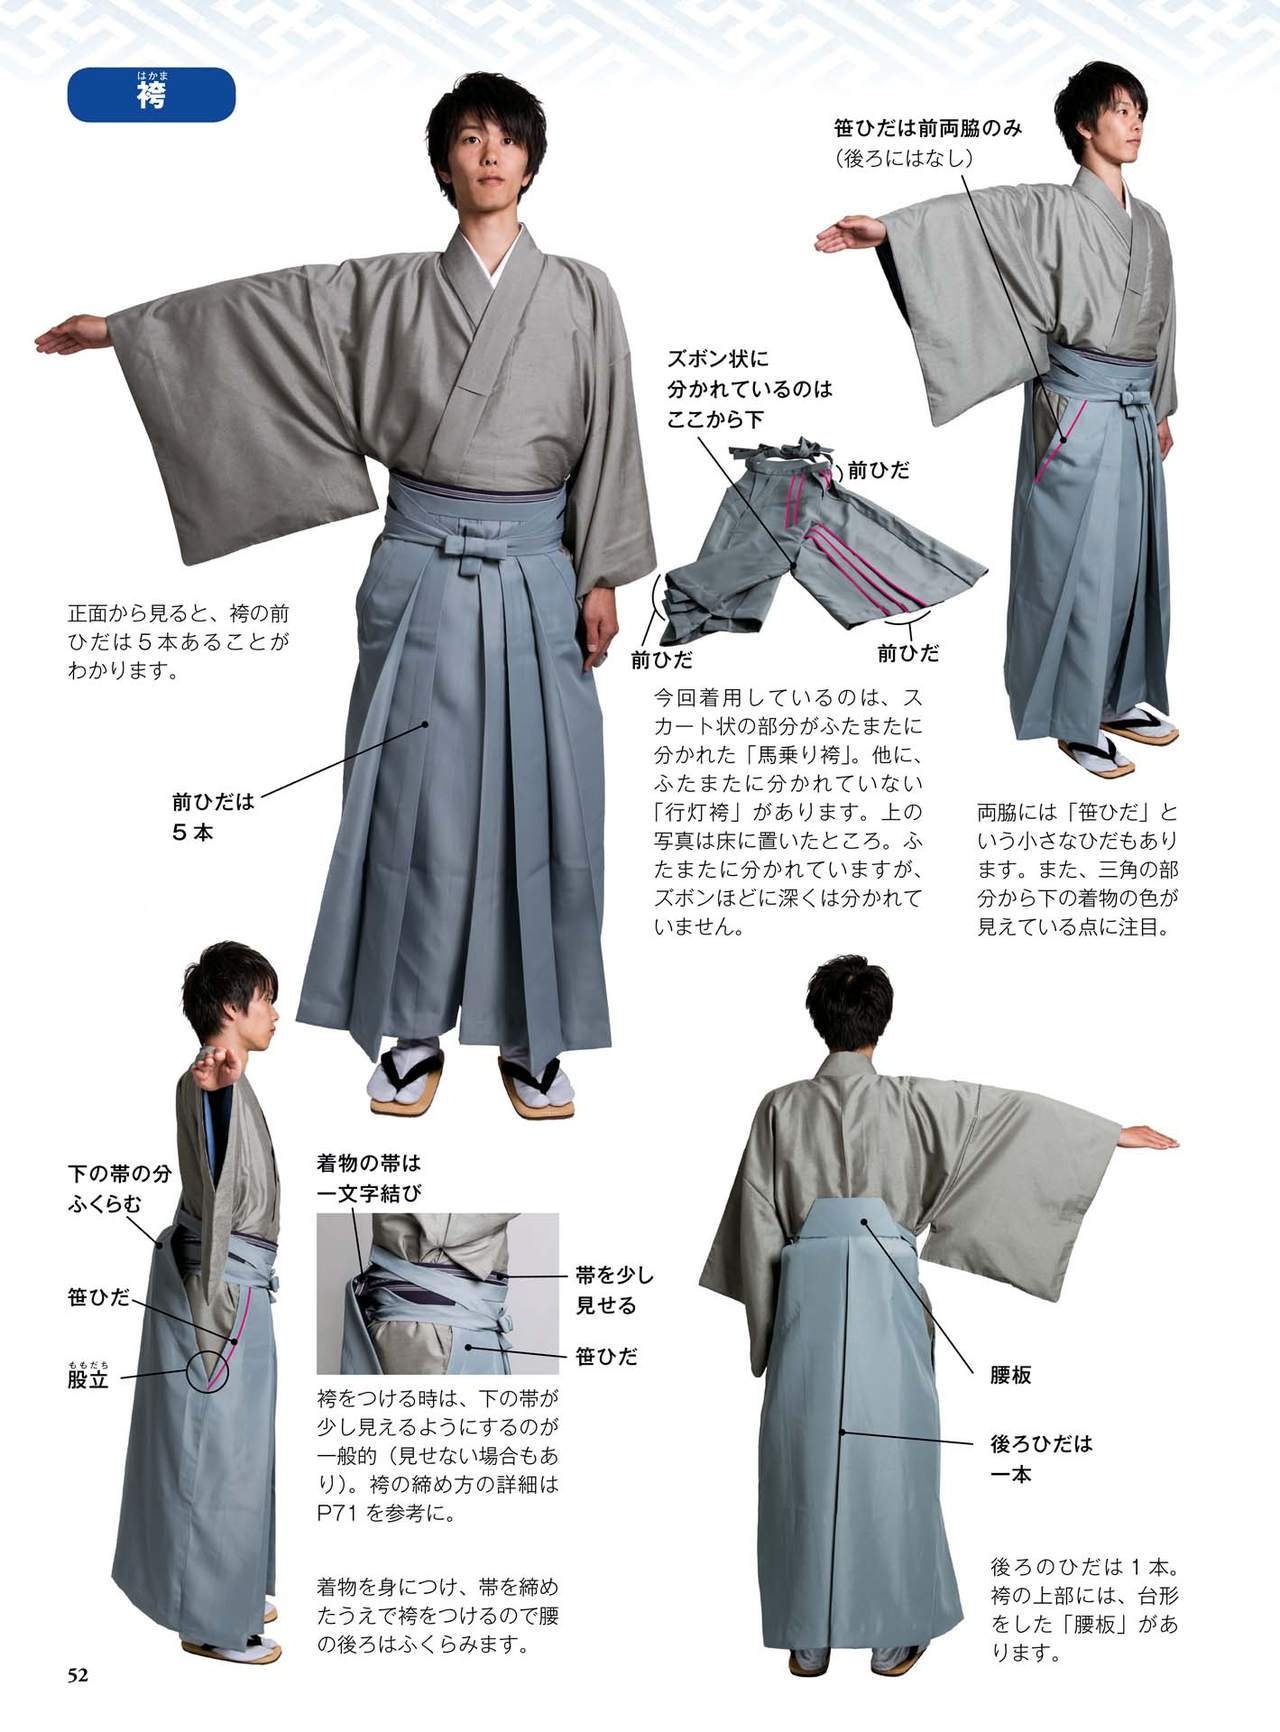 How to draw a kimono: From the basics to the point to advanced 53